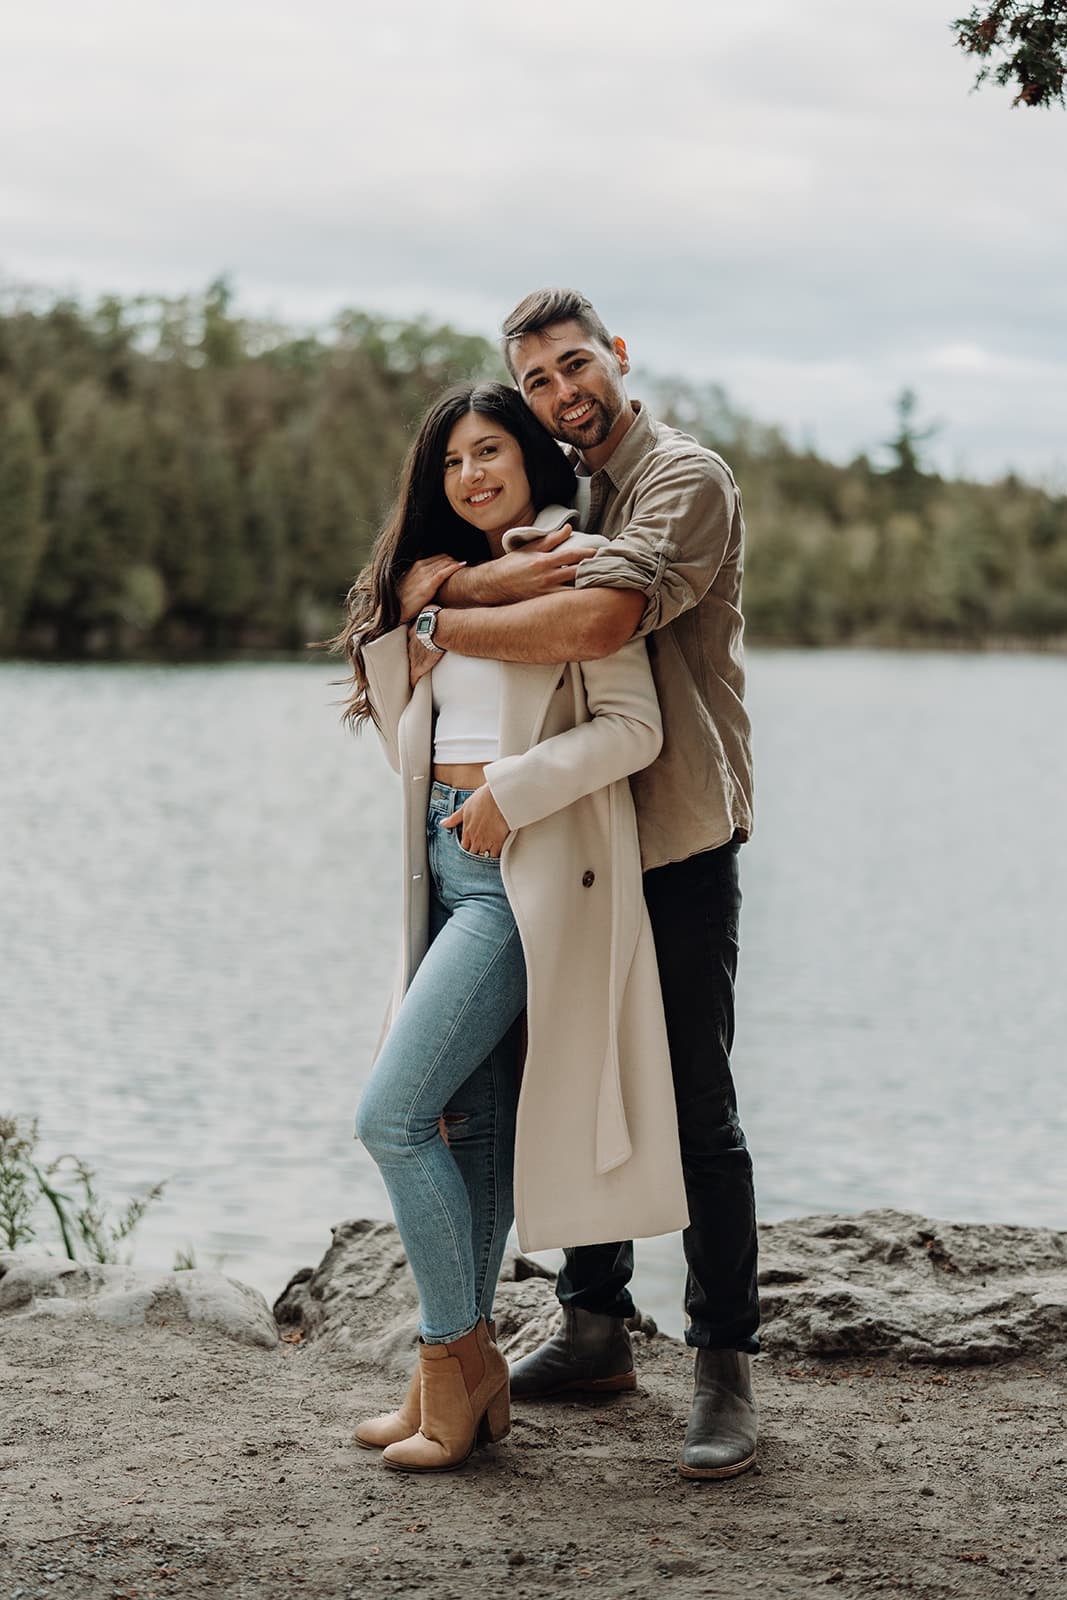 What to Wear for Your Engagement Photoshoot